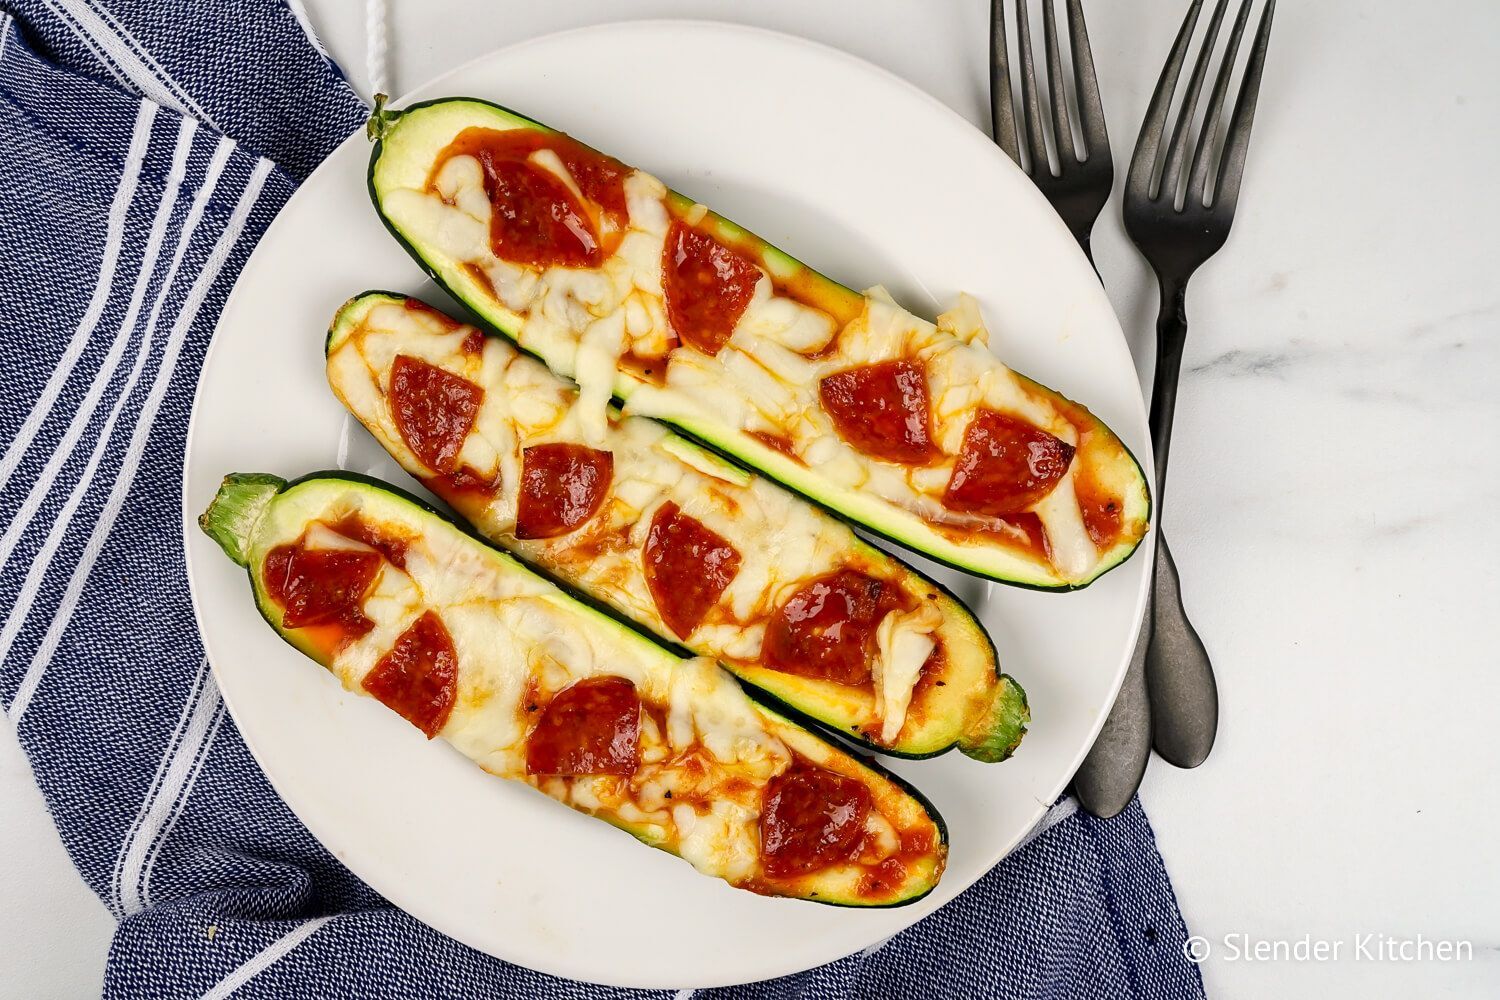 Zucchini pizza boats with marinara sauce, melted mozzarella cheese, and pepperoni on a white plate.